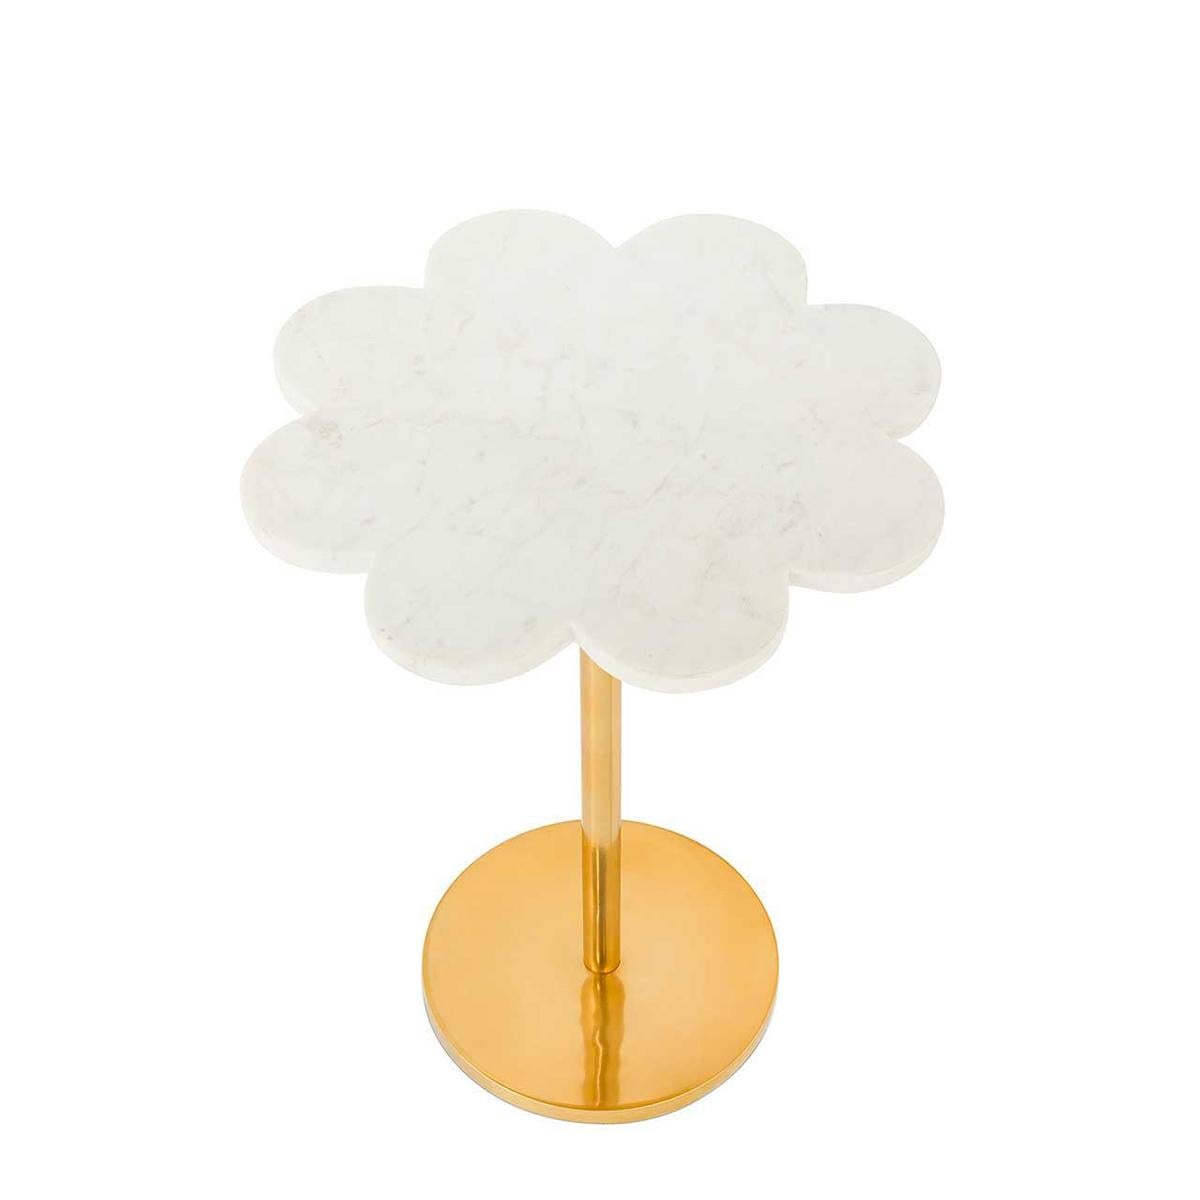 Side Table Margaret Stone with structure in
steel in gold finish and with white polished
stone top.